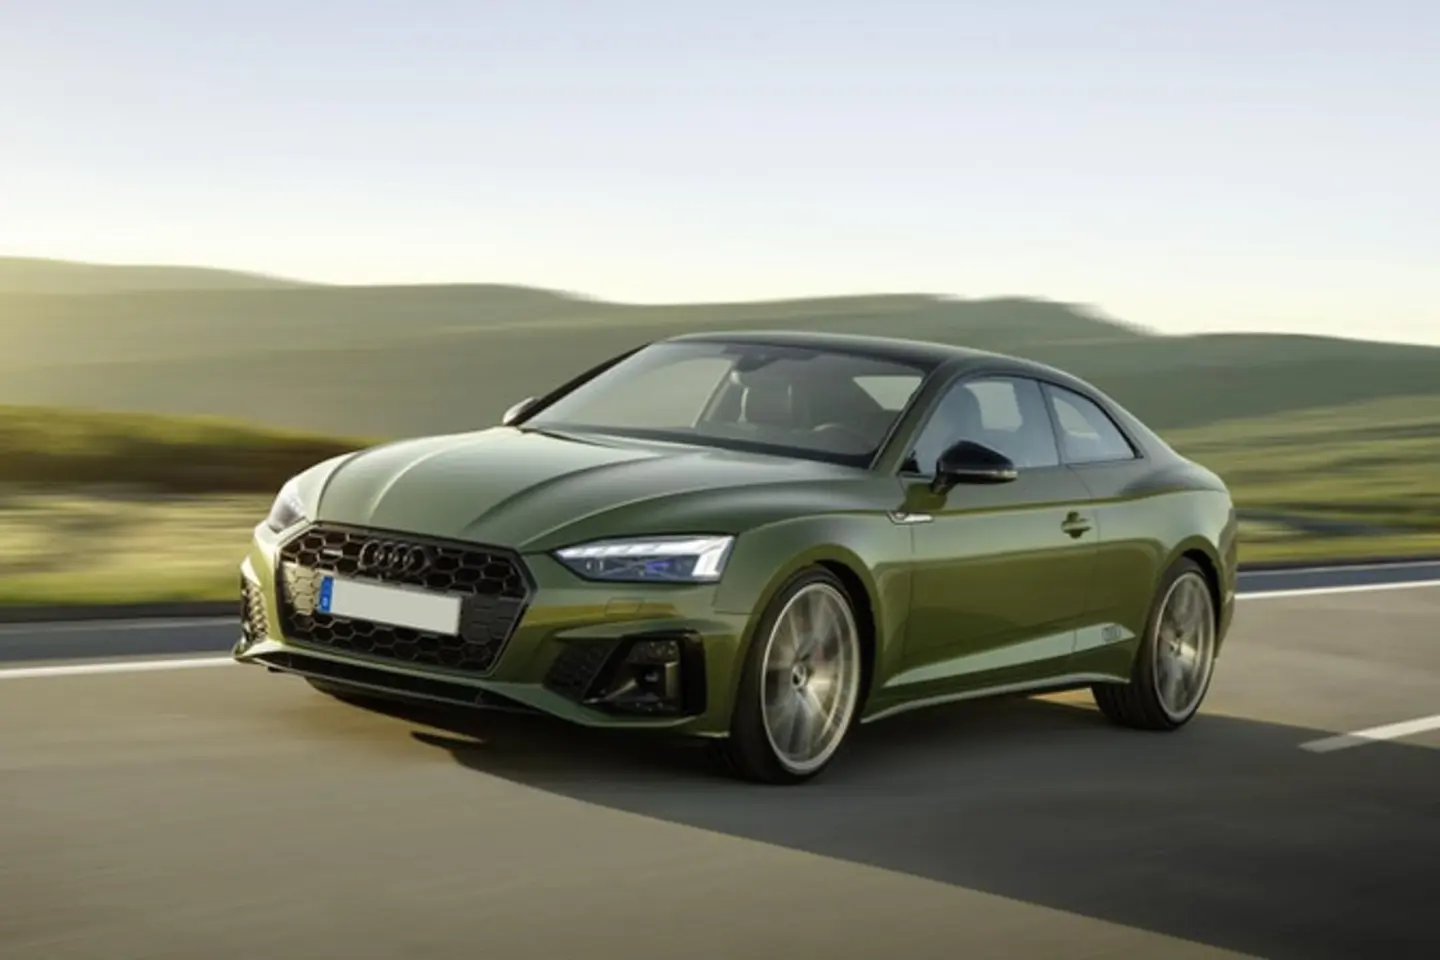 The exterior of a green Audi A5